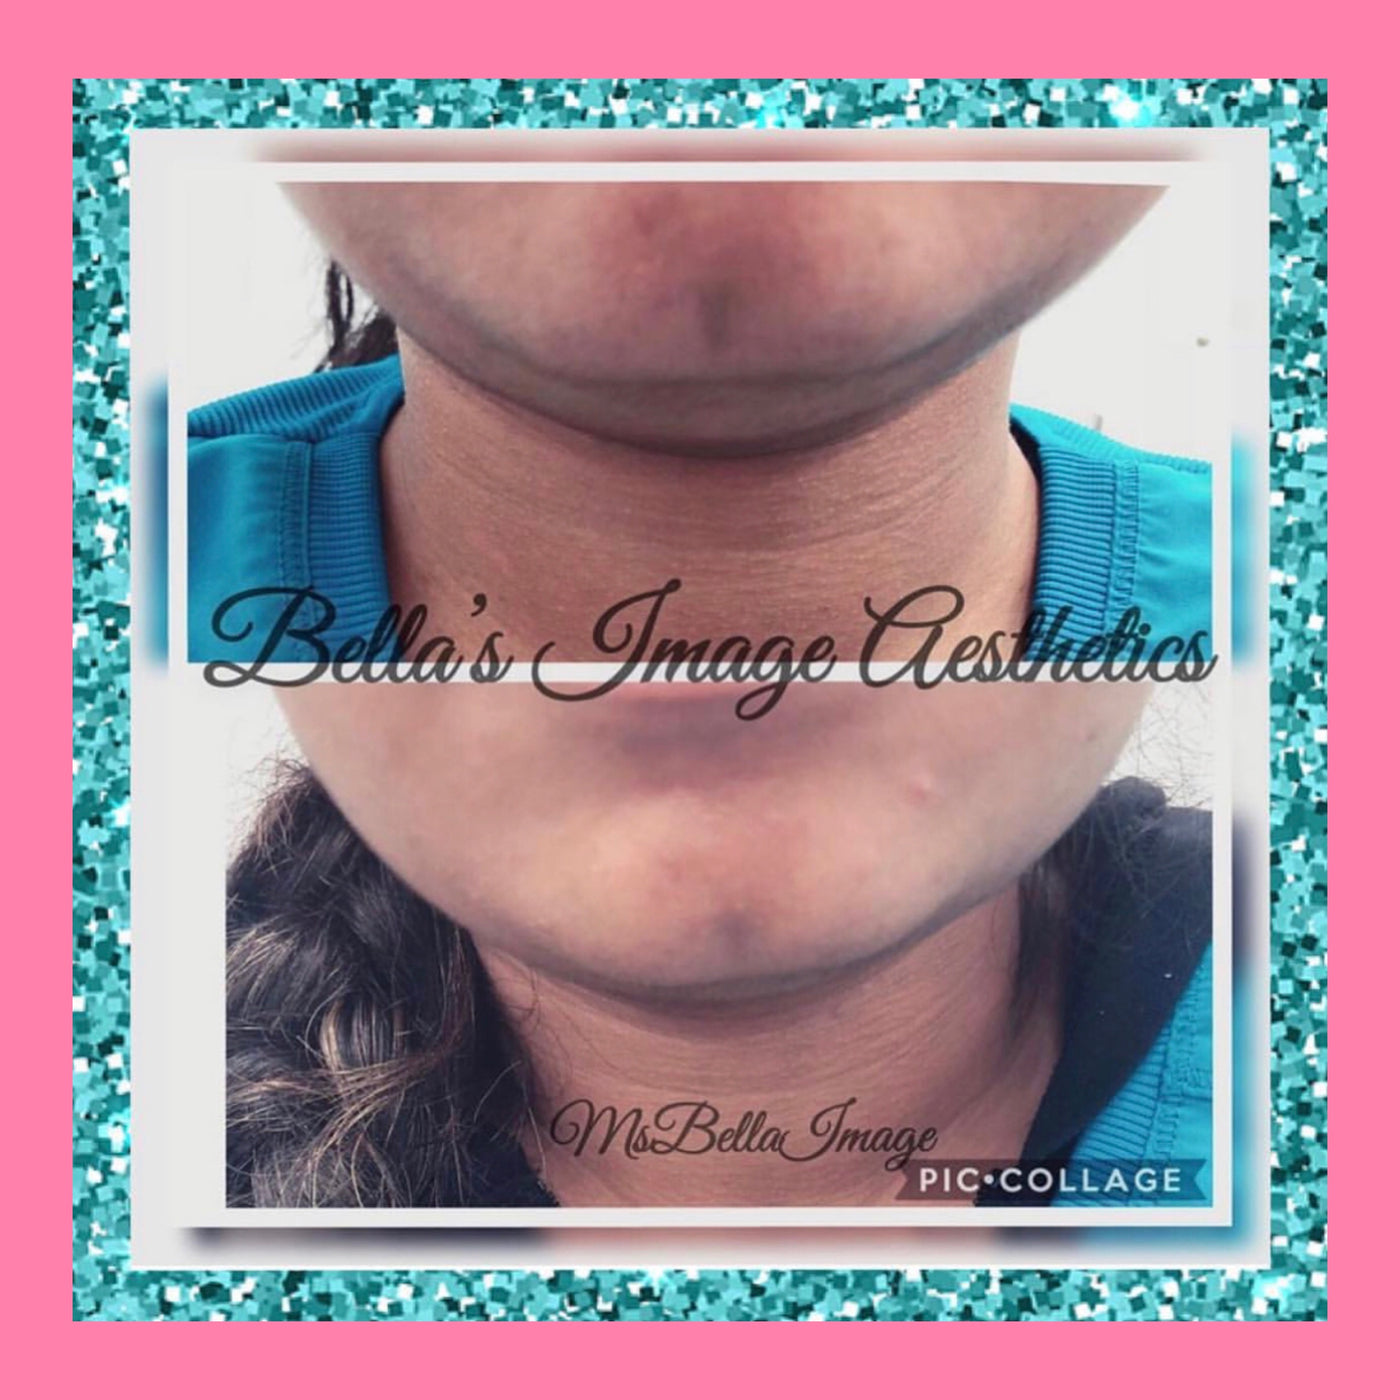 DOUBLE CHIN REDUCTION